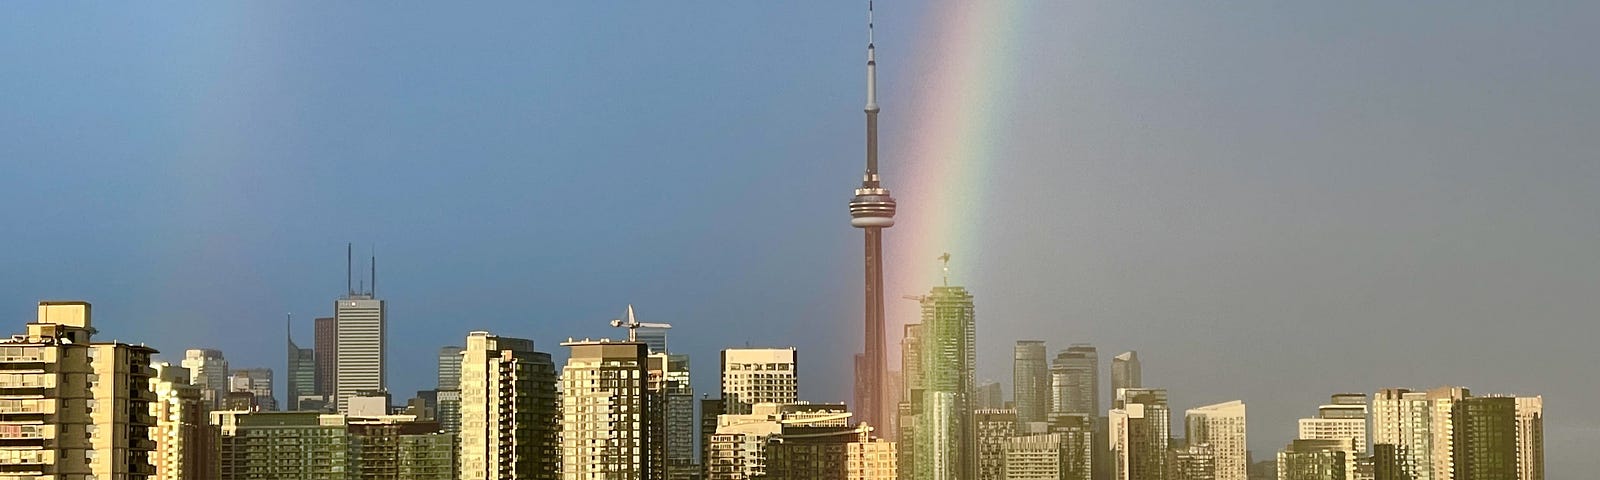 Skyline of Toronto with the CN Tower in the middle and a bright rainbow coming down in front of the Tower